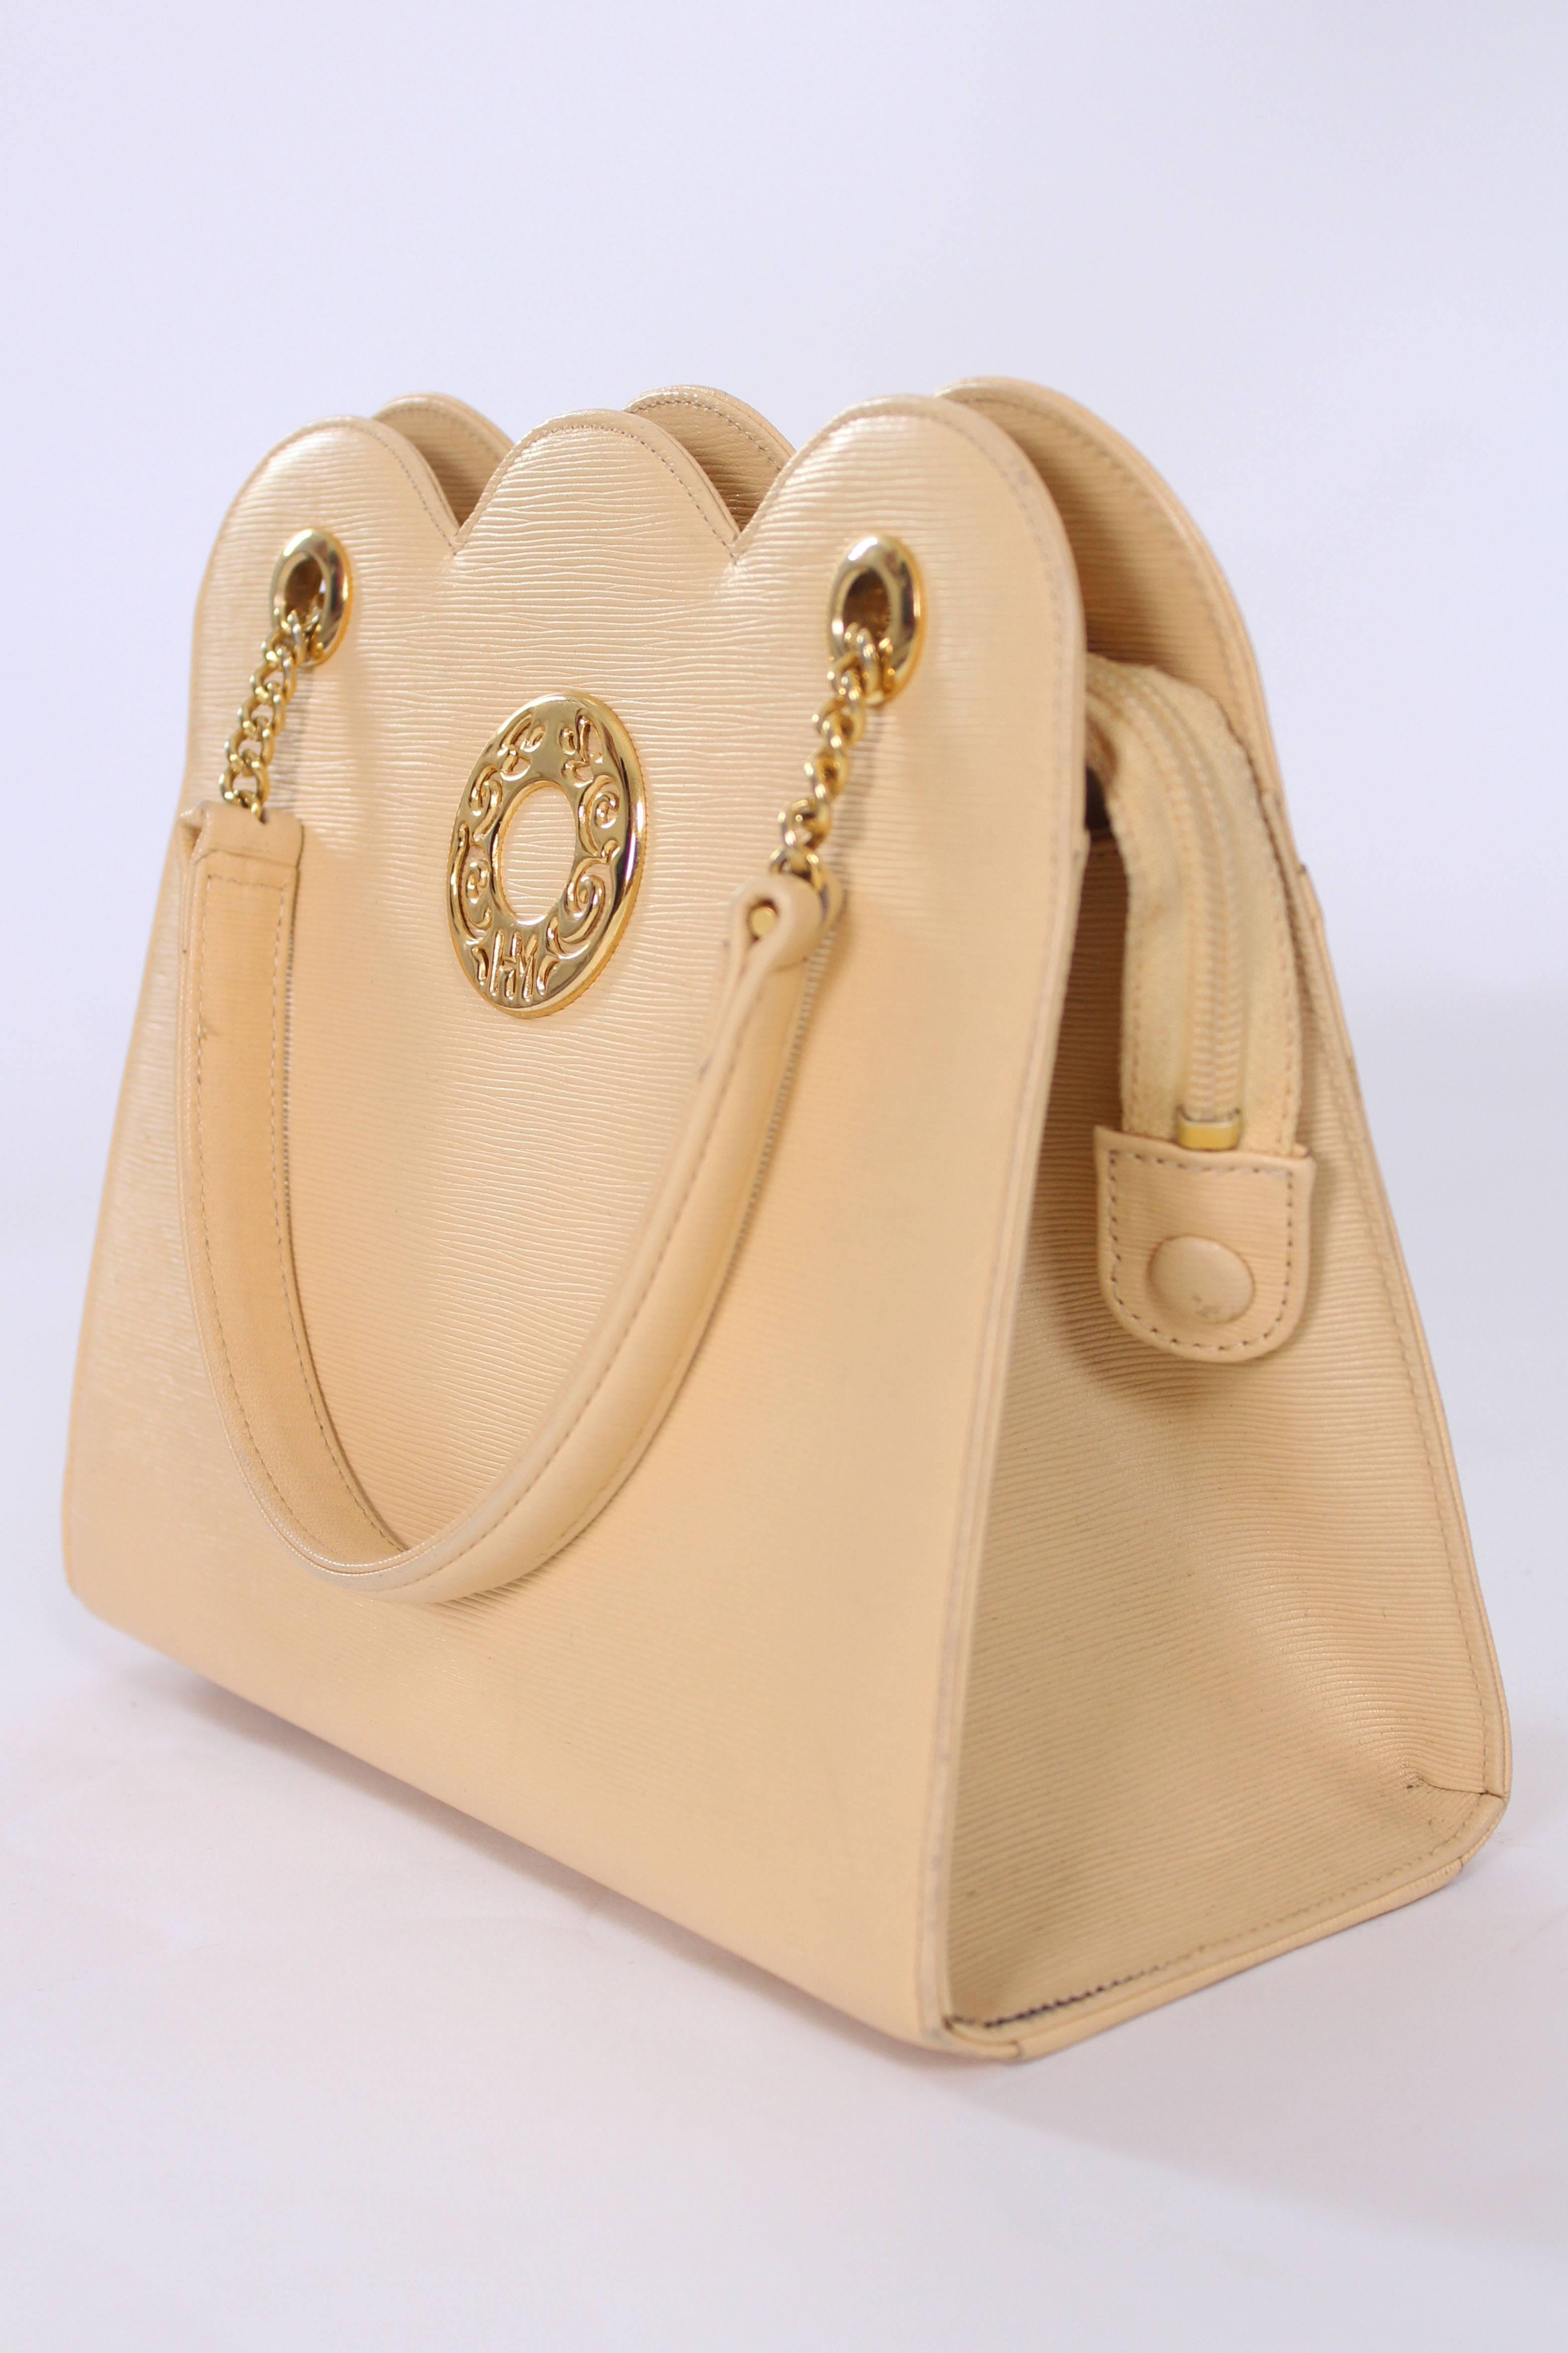 A chic pale yellow handbag in ribbed leather with scalloped edging, by Japanease designer Hanae Mori. This bag has two leather handles with chain ends, and a zip top fastening. There is a pouch pocket and zip pocket inside and a slip pocket on the